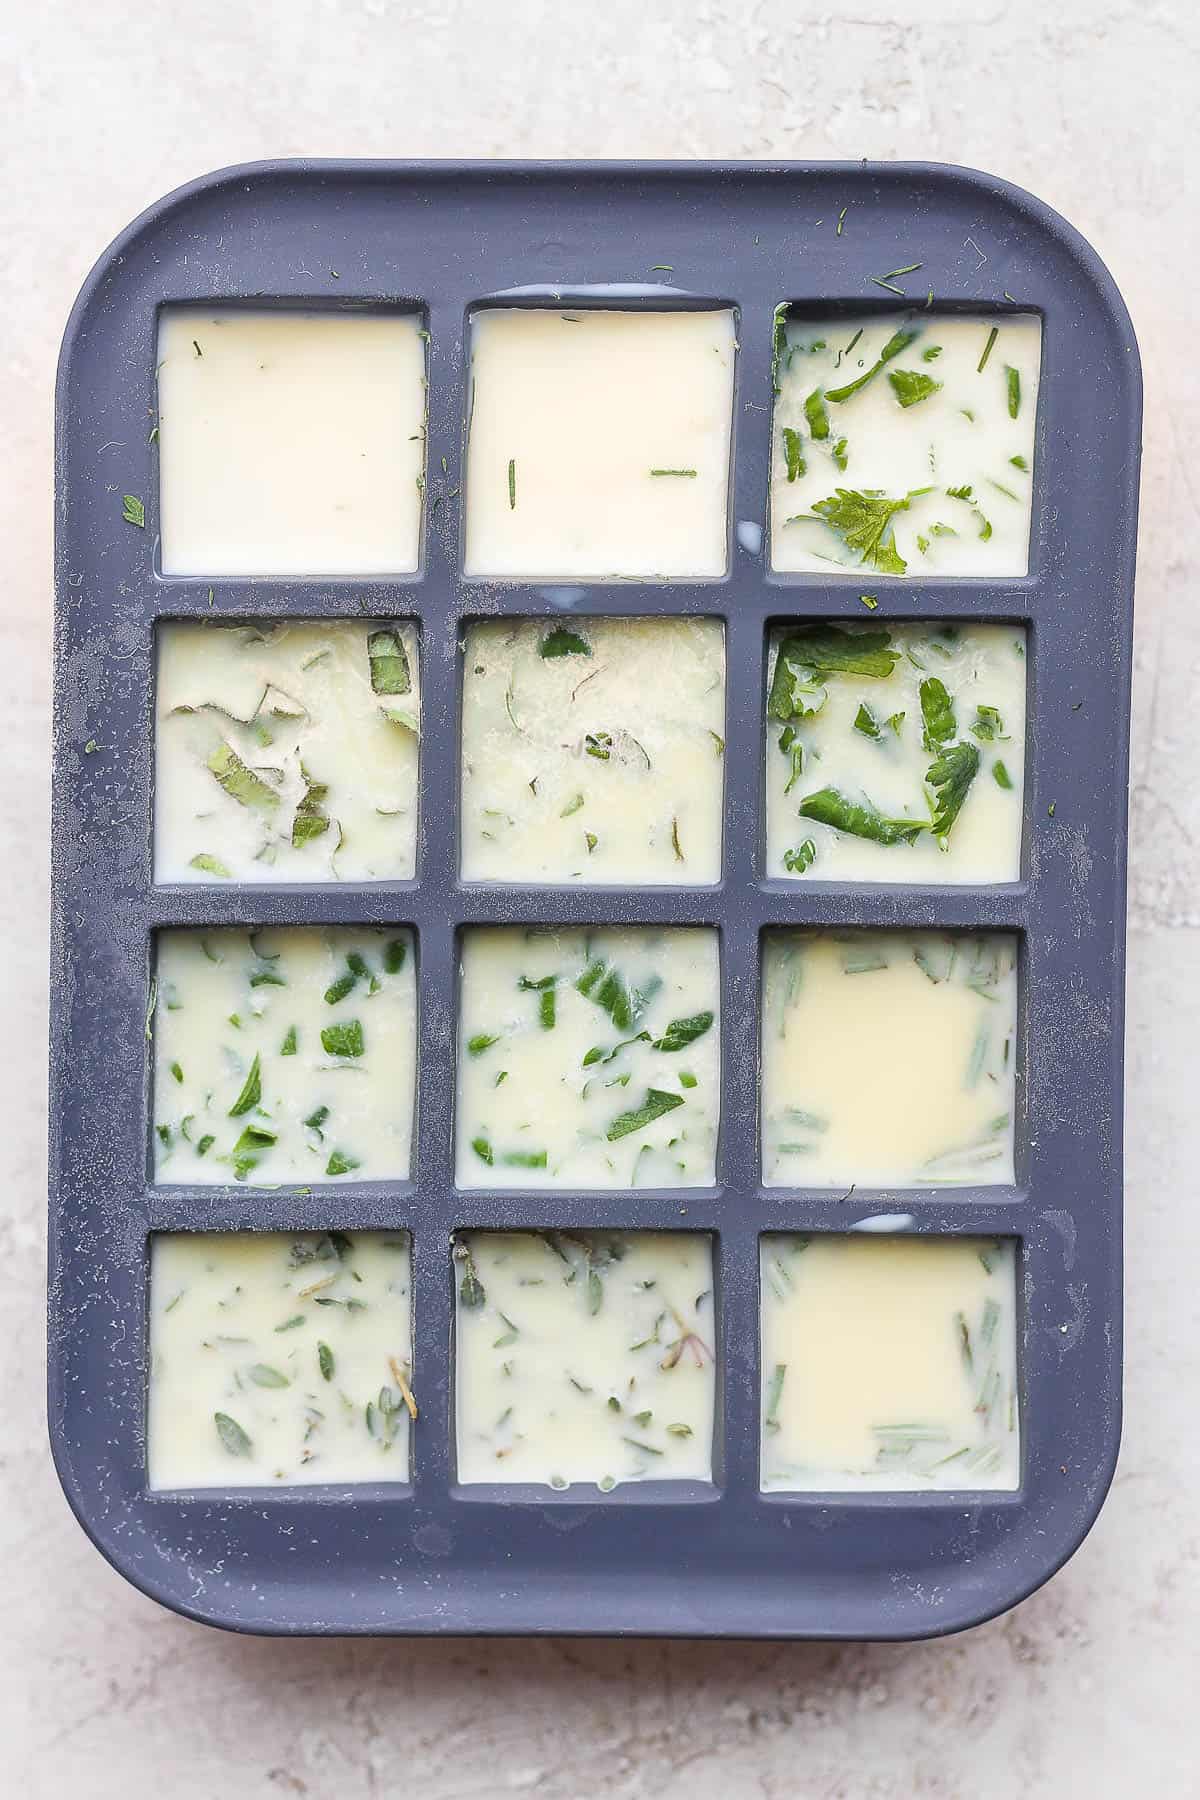 Herb Ice Cubes (Wow Your Friends!)